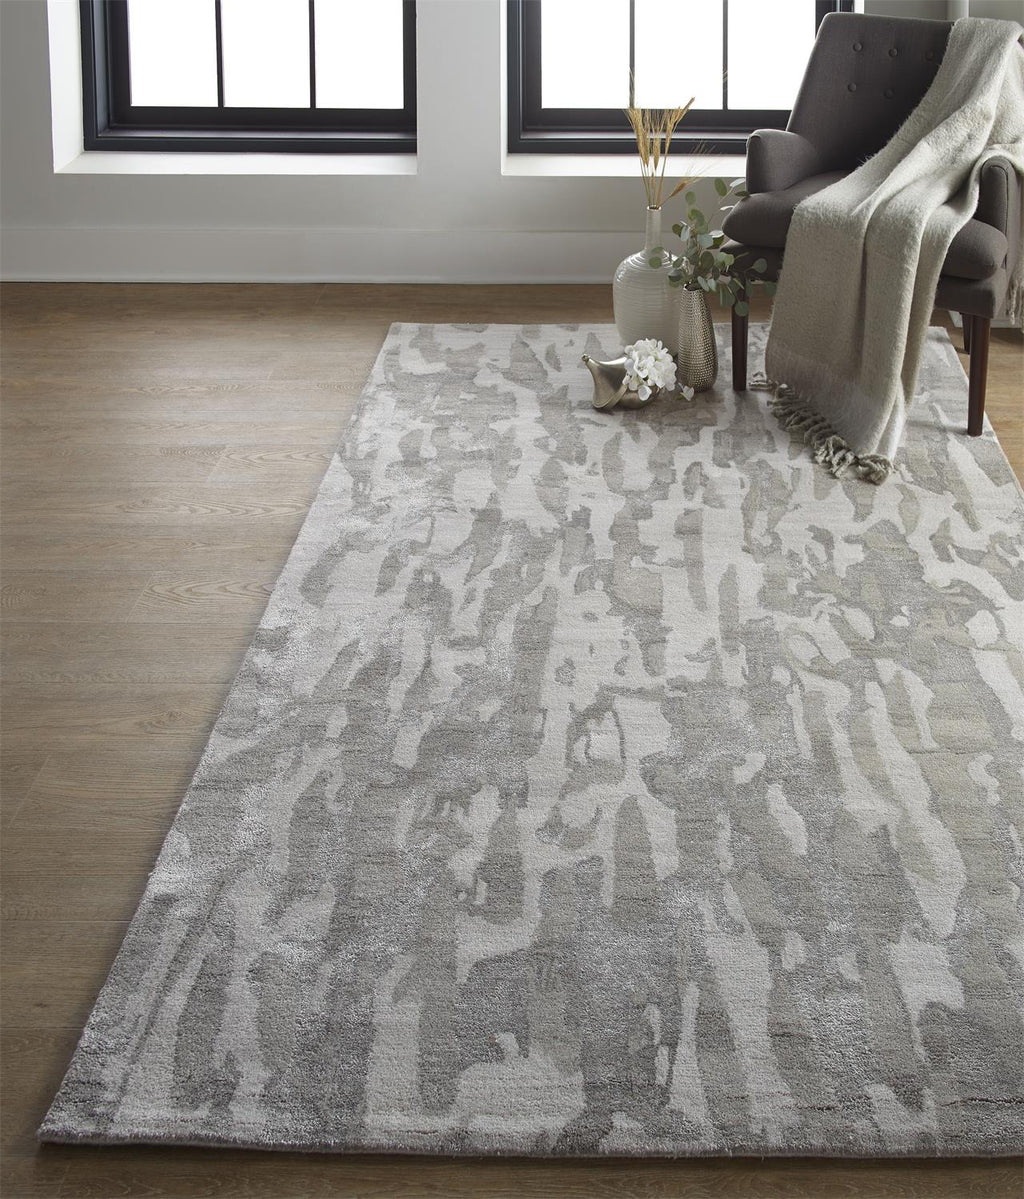 Feizy Dryden 8786F Gray/Silver Area Rug Lifestyle Image Feature